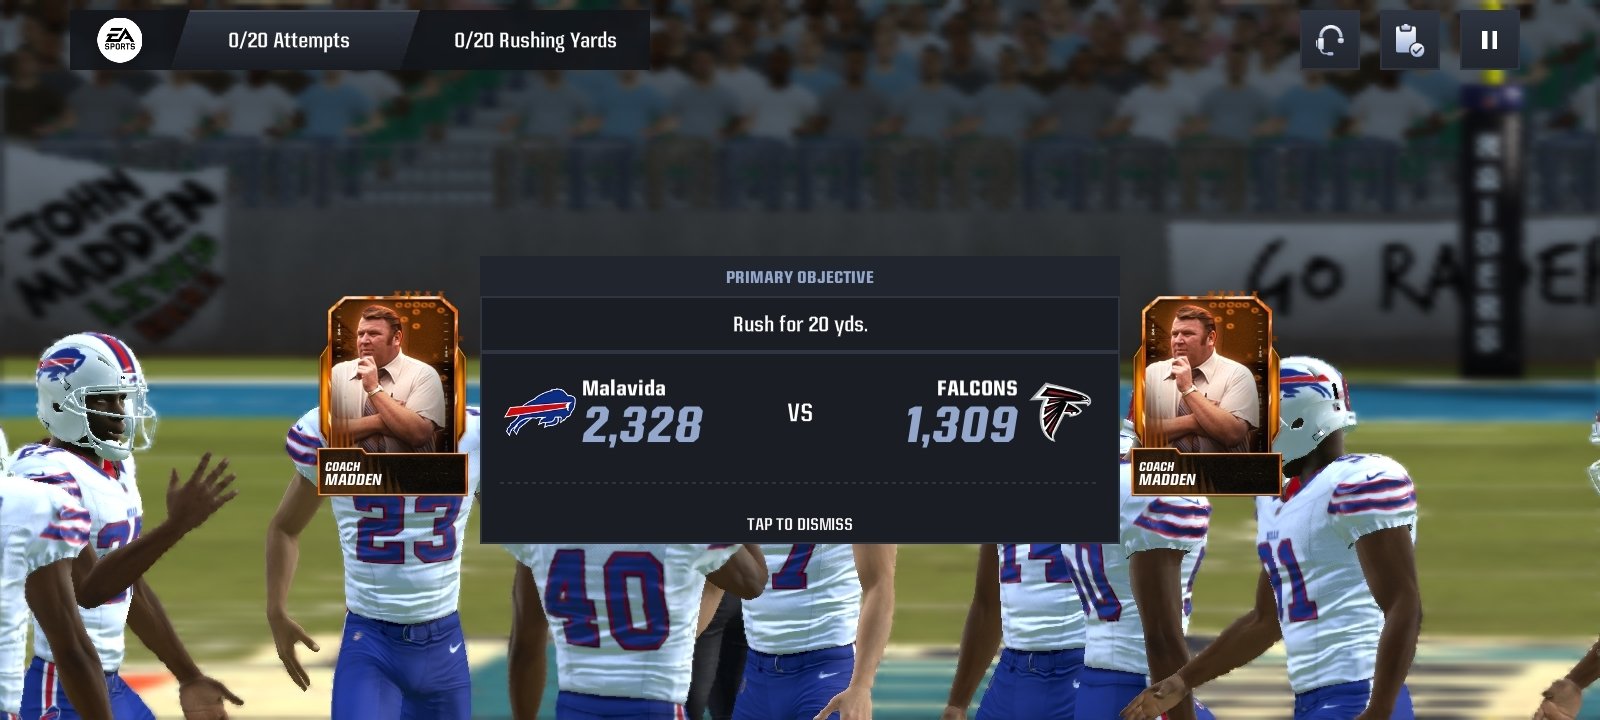 Madden Nfl 21 Mobile Football 7 5 2 Download For Android Apk Free